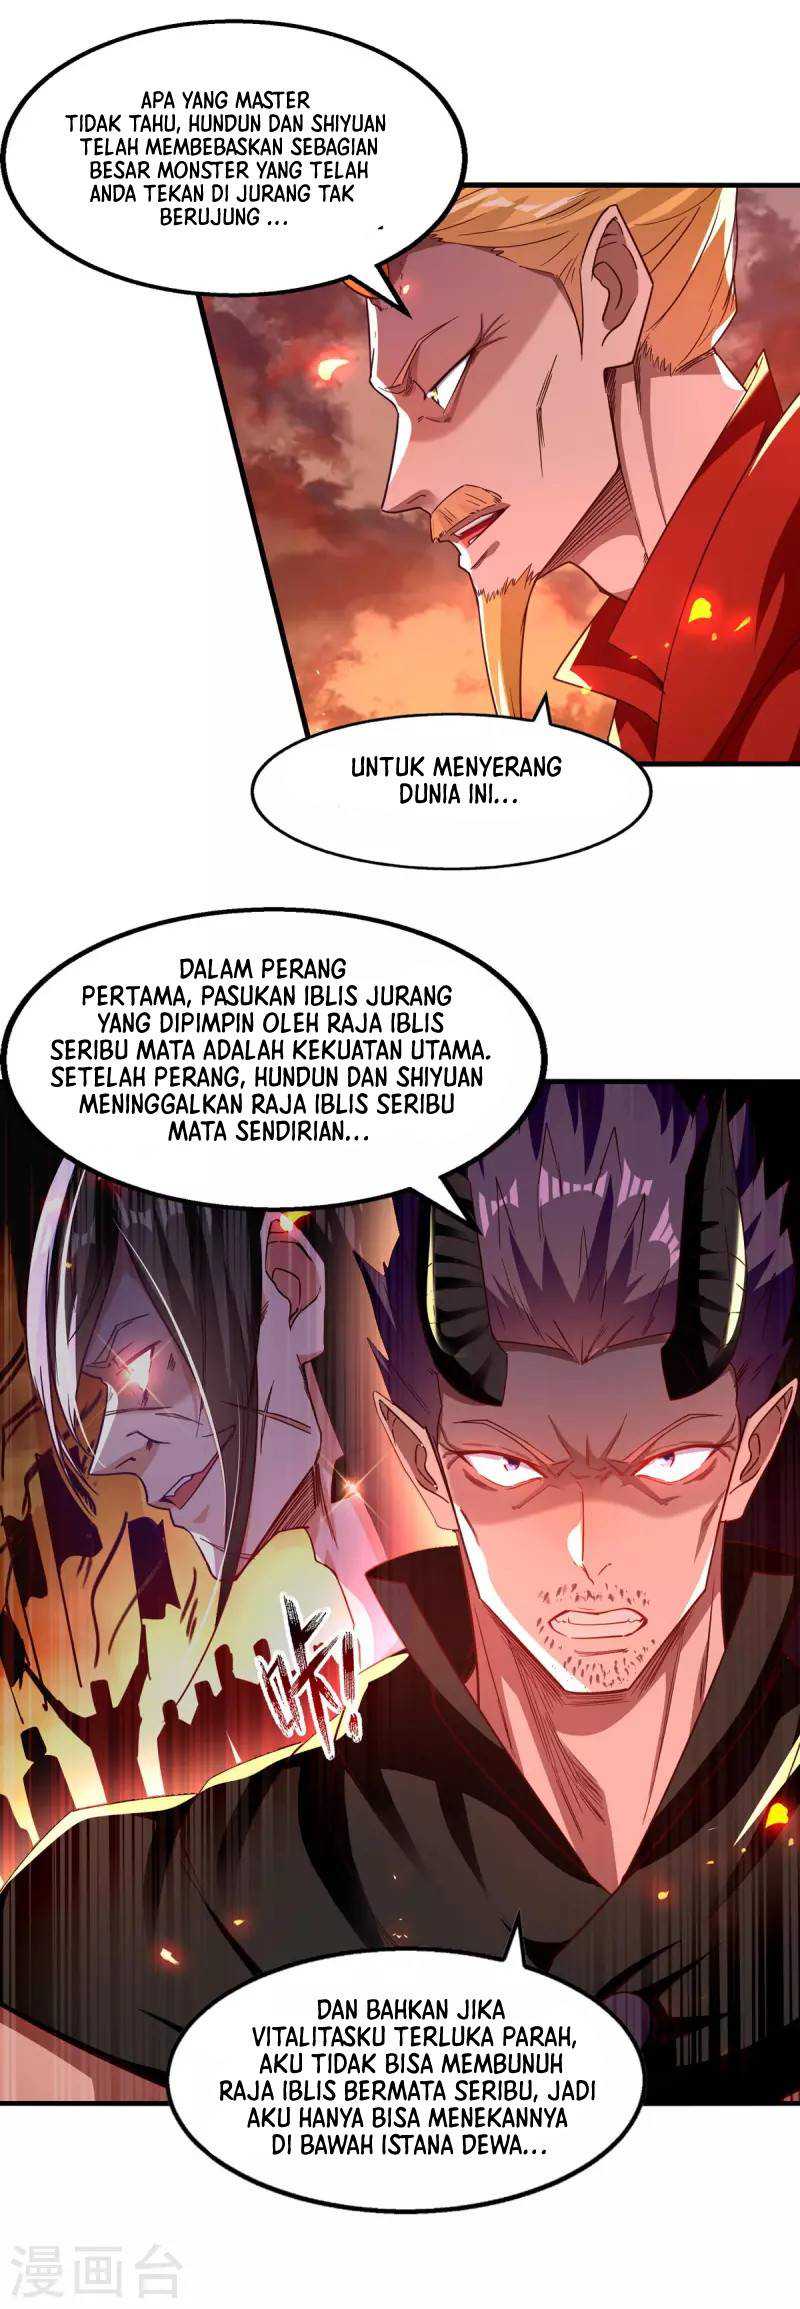 Against The Heaven Supreme (Heaven Guards) Chapter 64